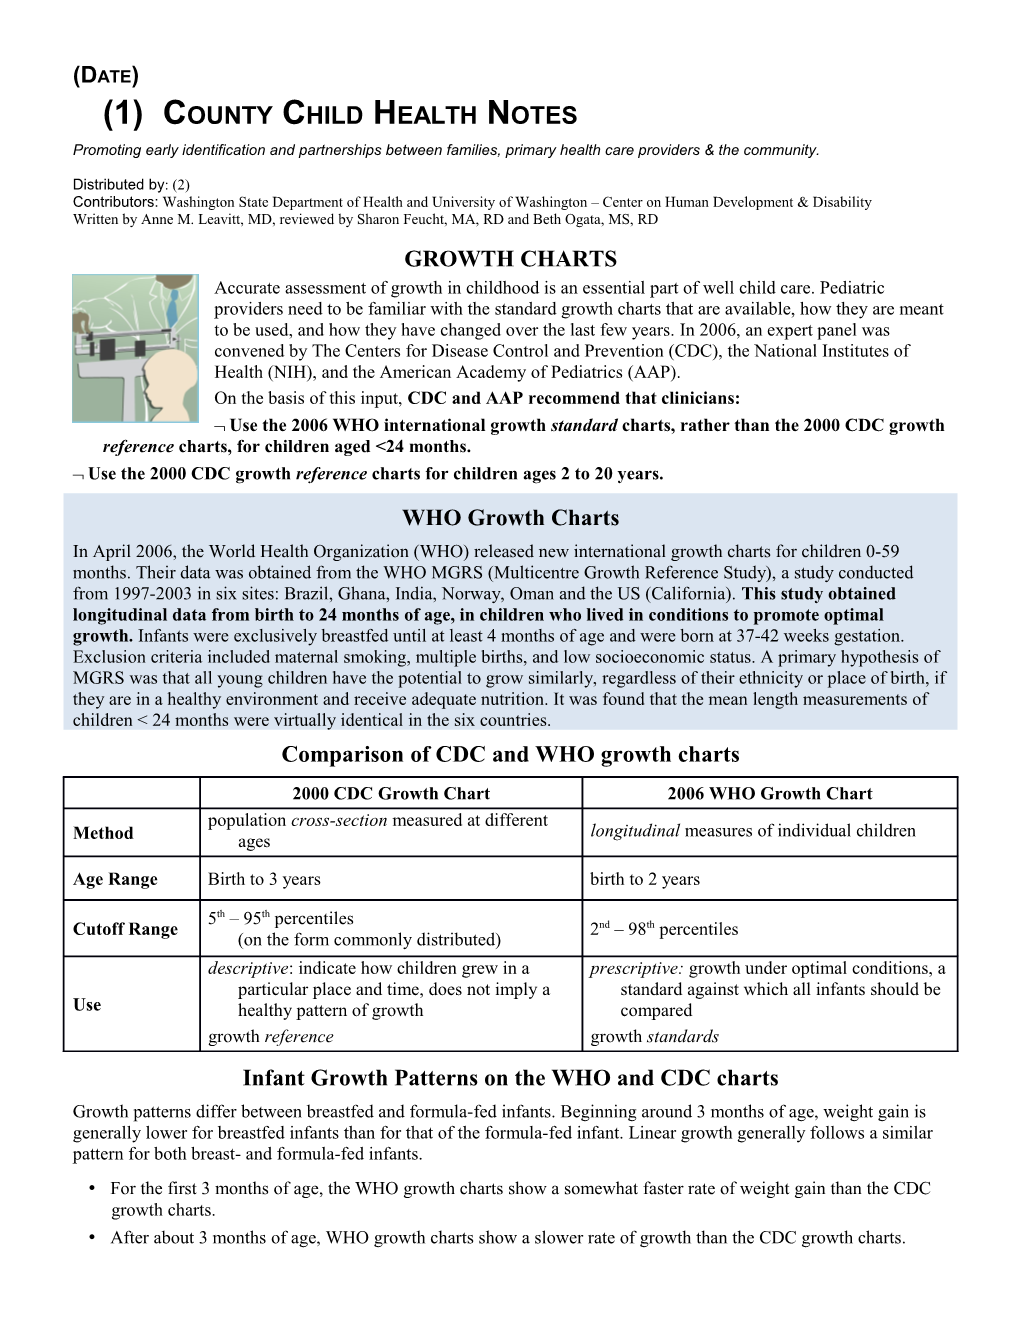 (1) County Child Health Notes s3